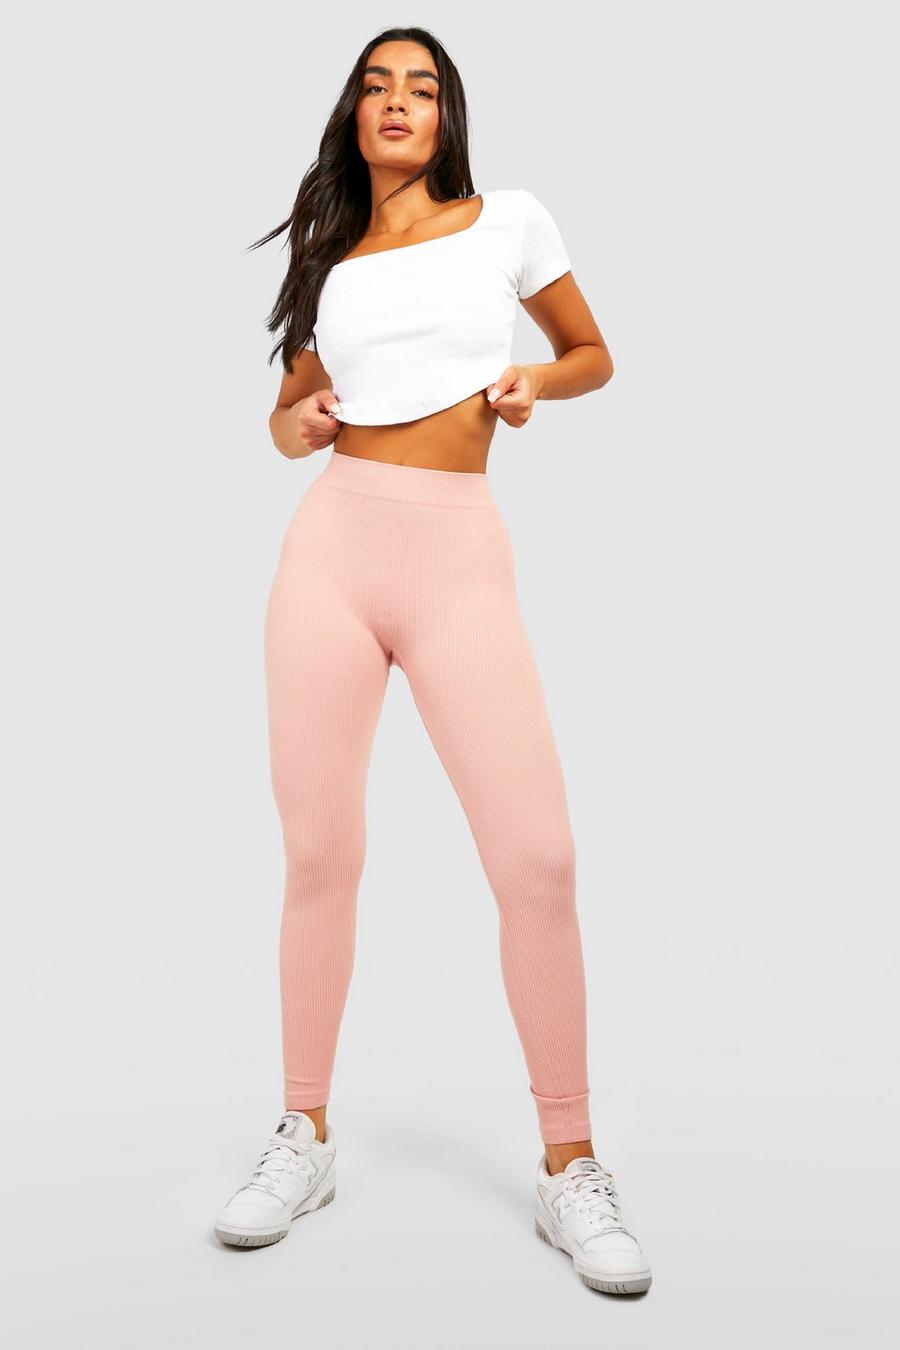 Blush pink Structured Seamless Contour Ribbed Leggings